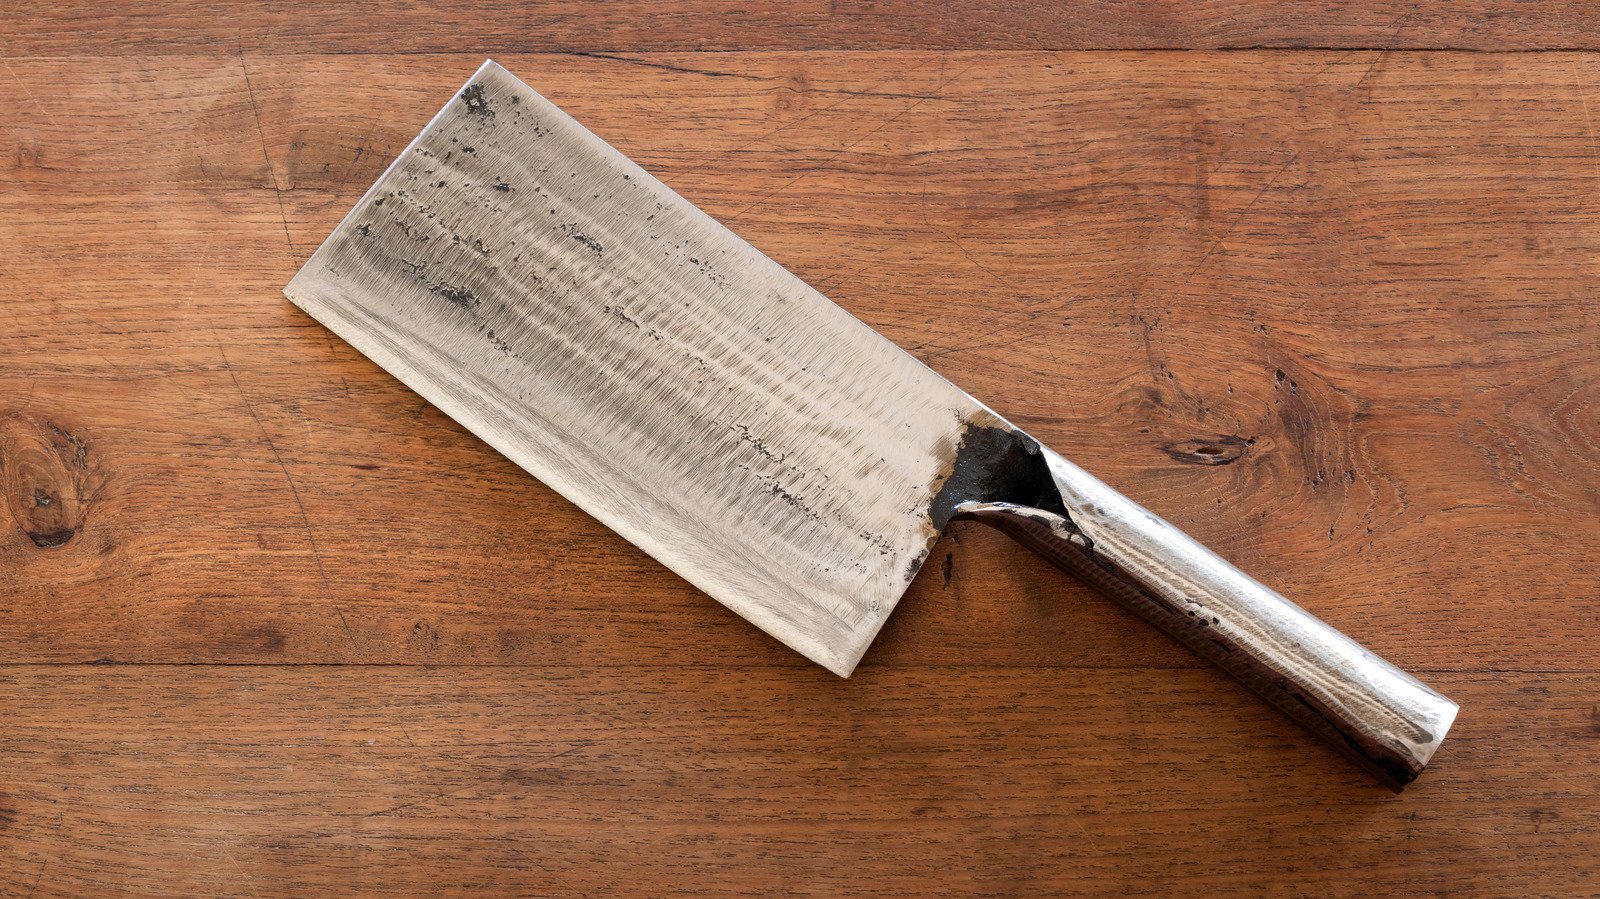 https://www.mashed.com/img/gallery/what-is-a-chinese-cleaver-and-what-is-it-best-used-for/l-intro-1672940798.jpg